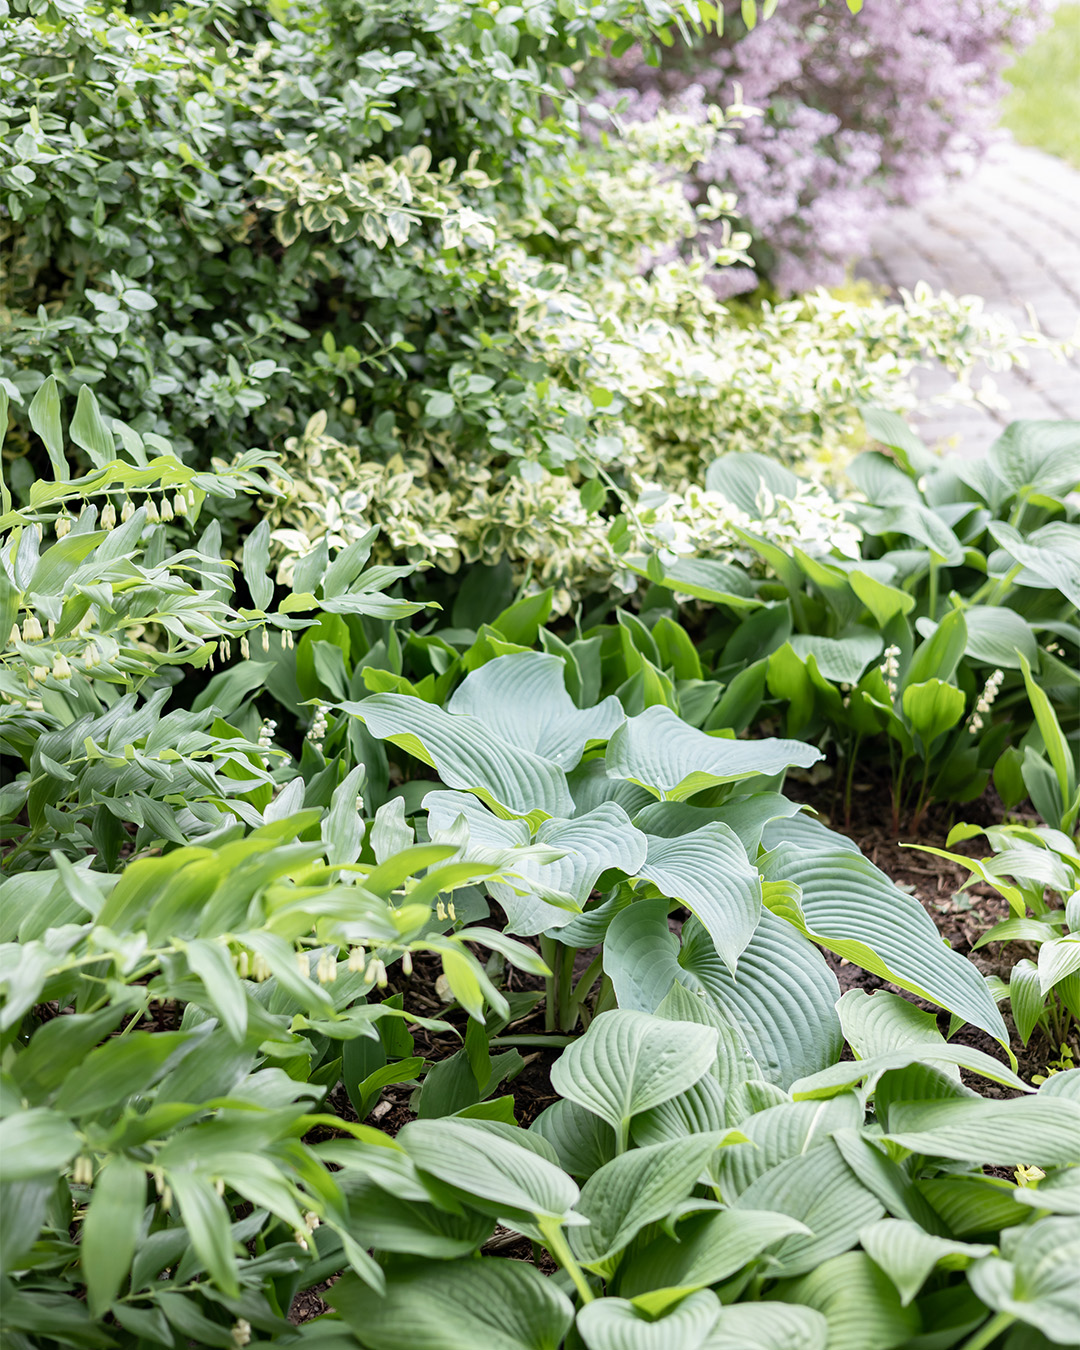 Solomon's seal in a shade garden with hostas and lily of the valley.